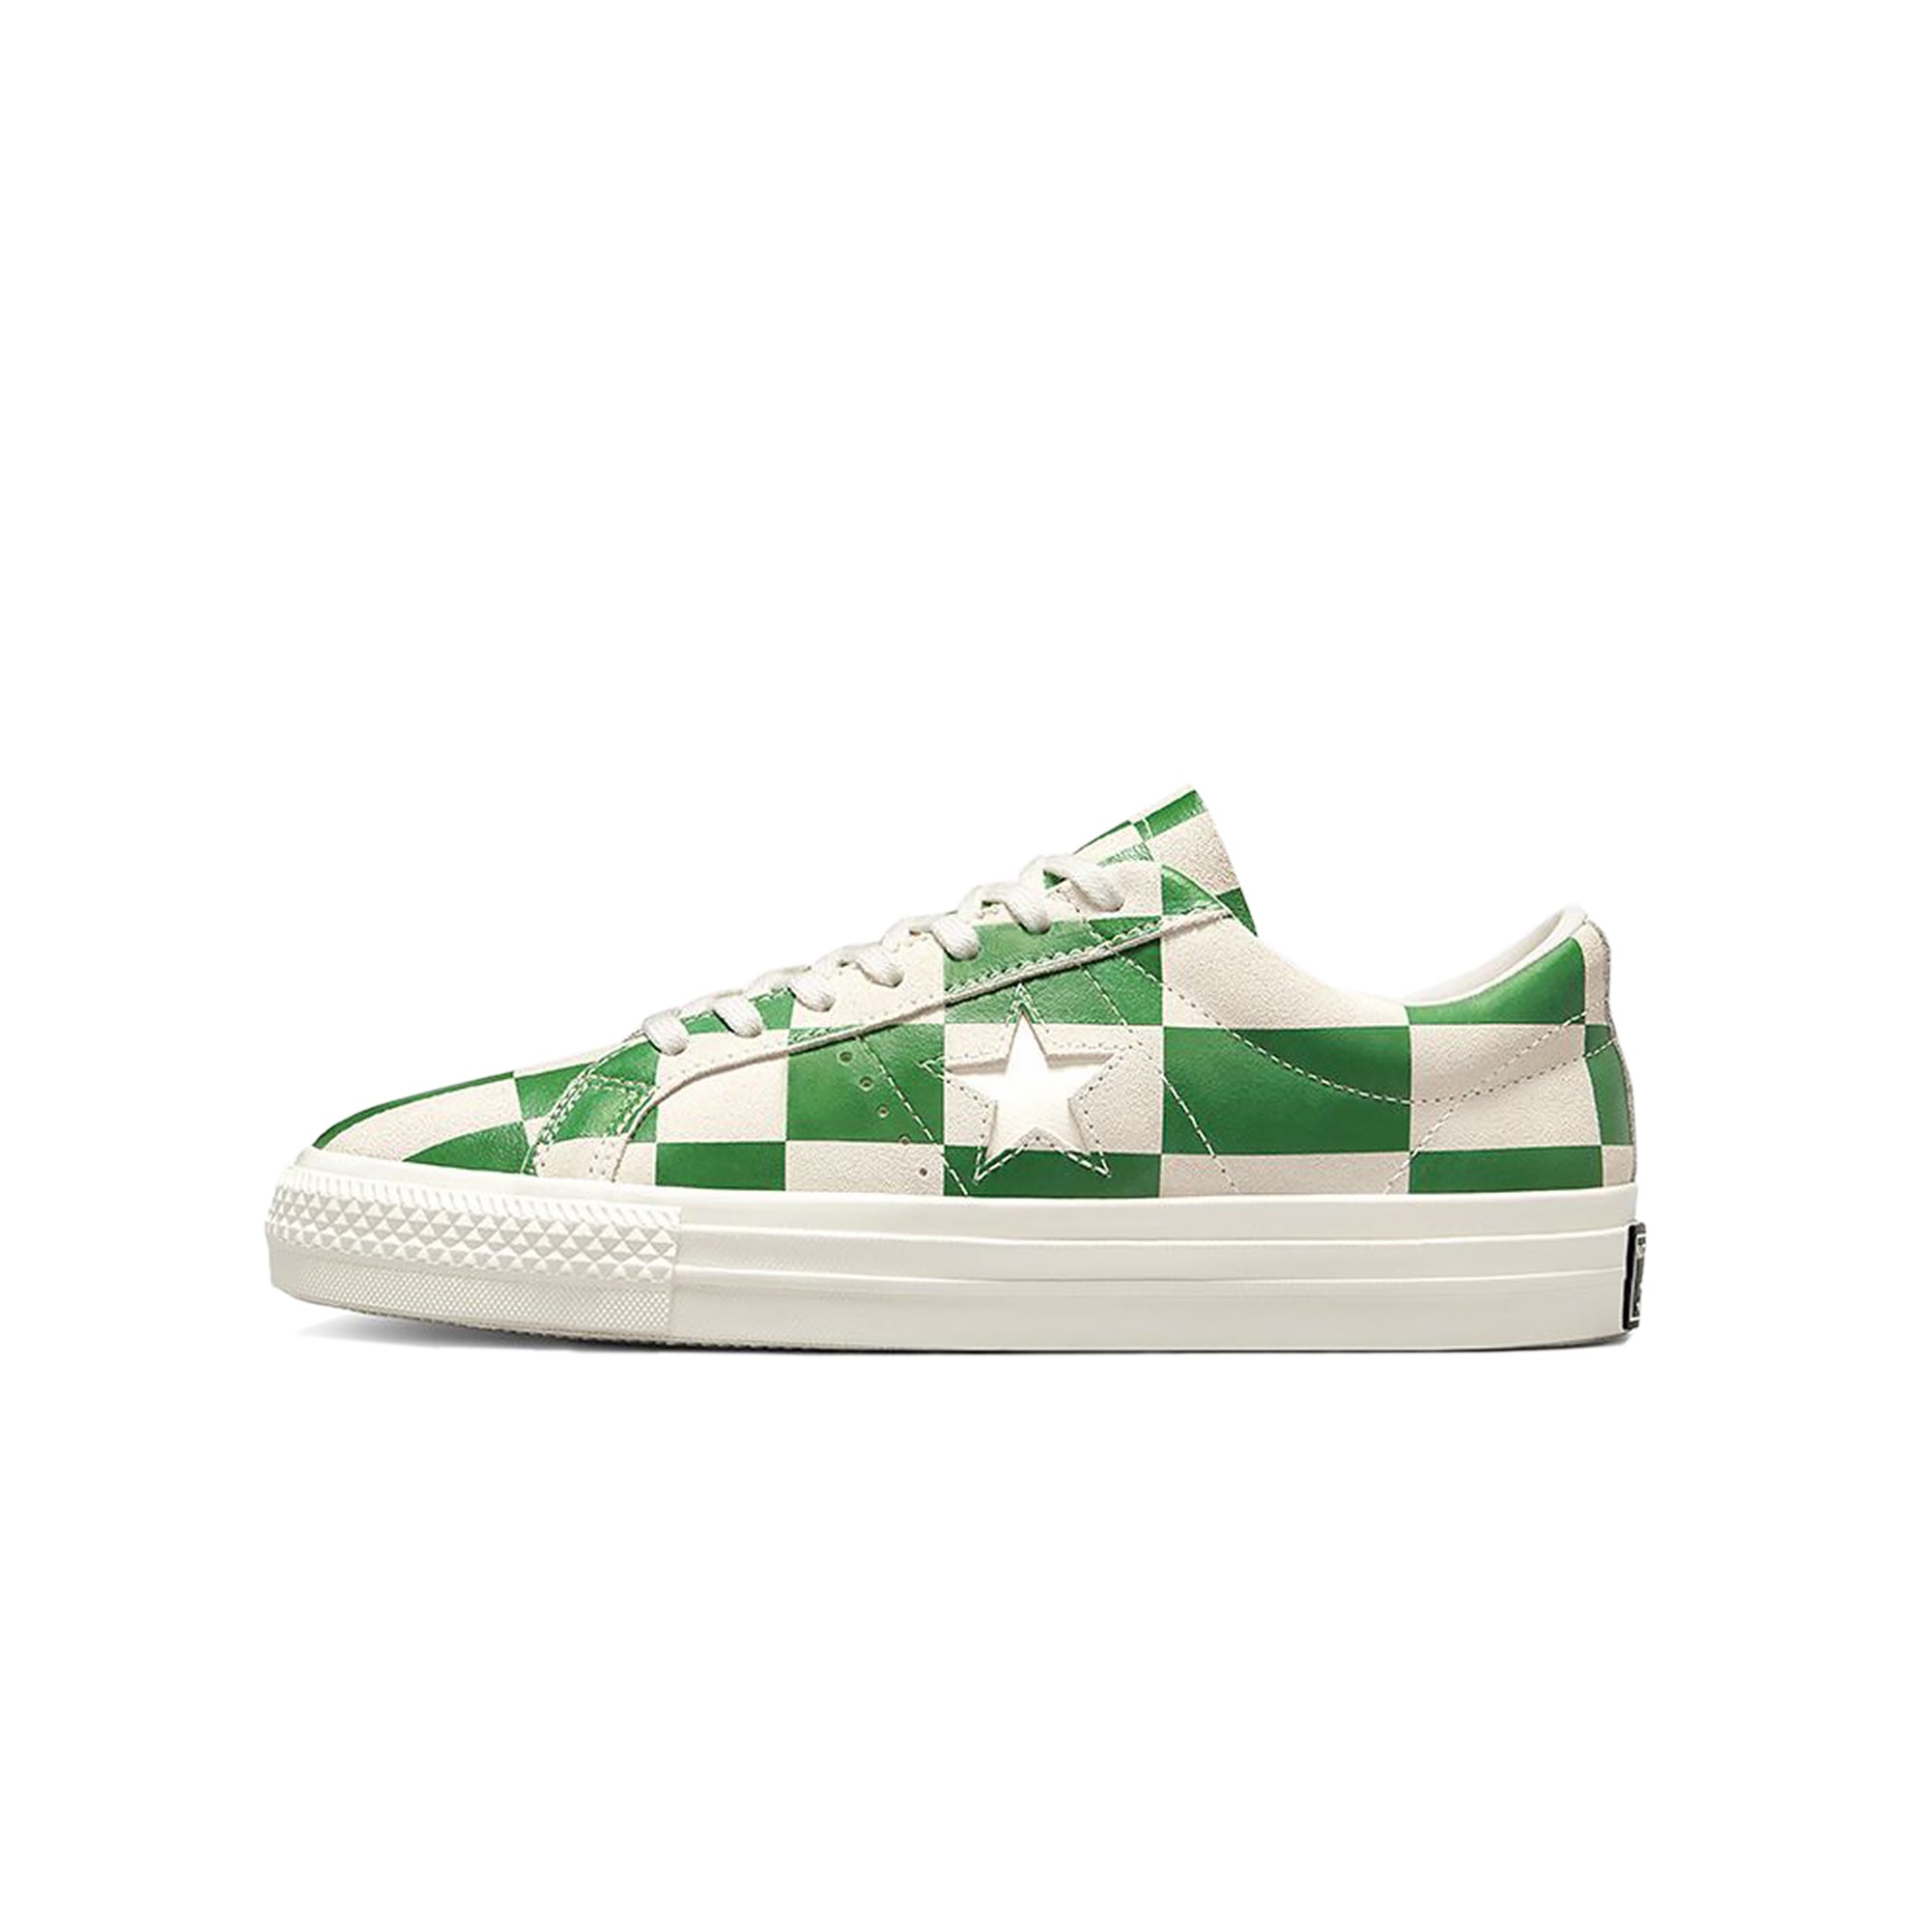 Converse One Star Shoes 'White/Medium Green' – Extra Butter